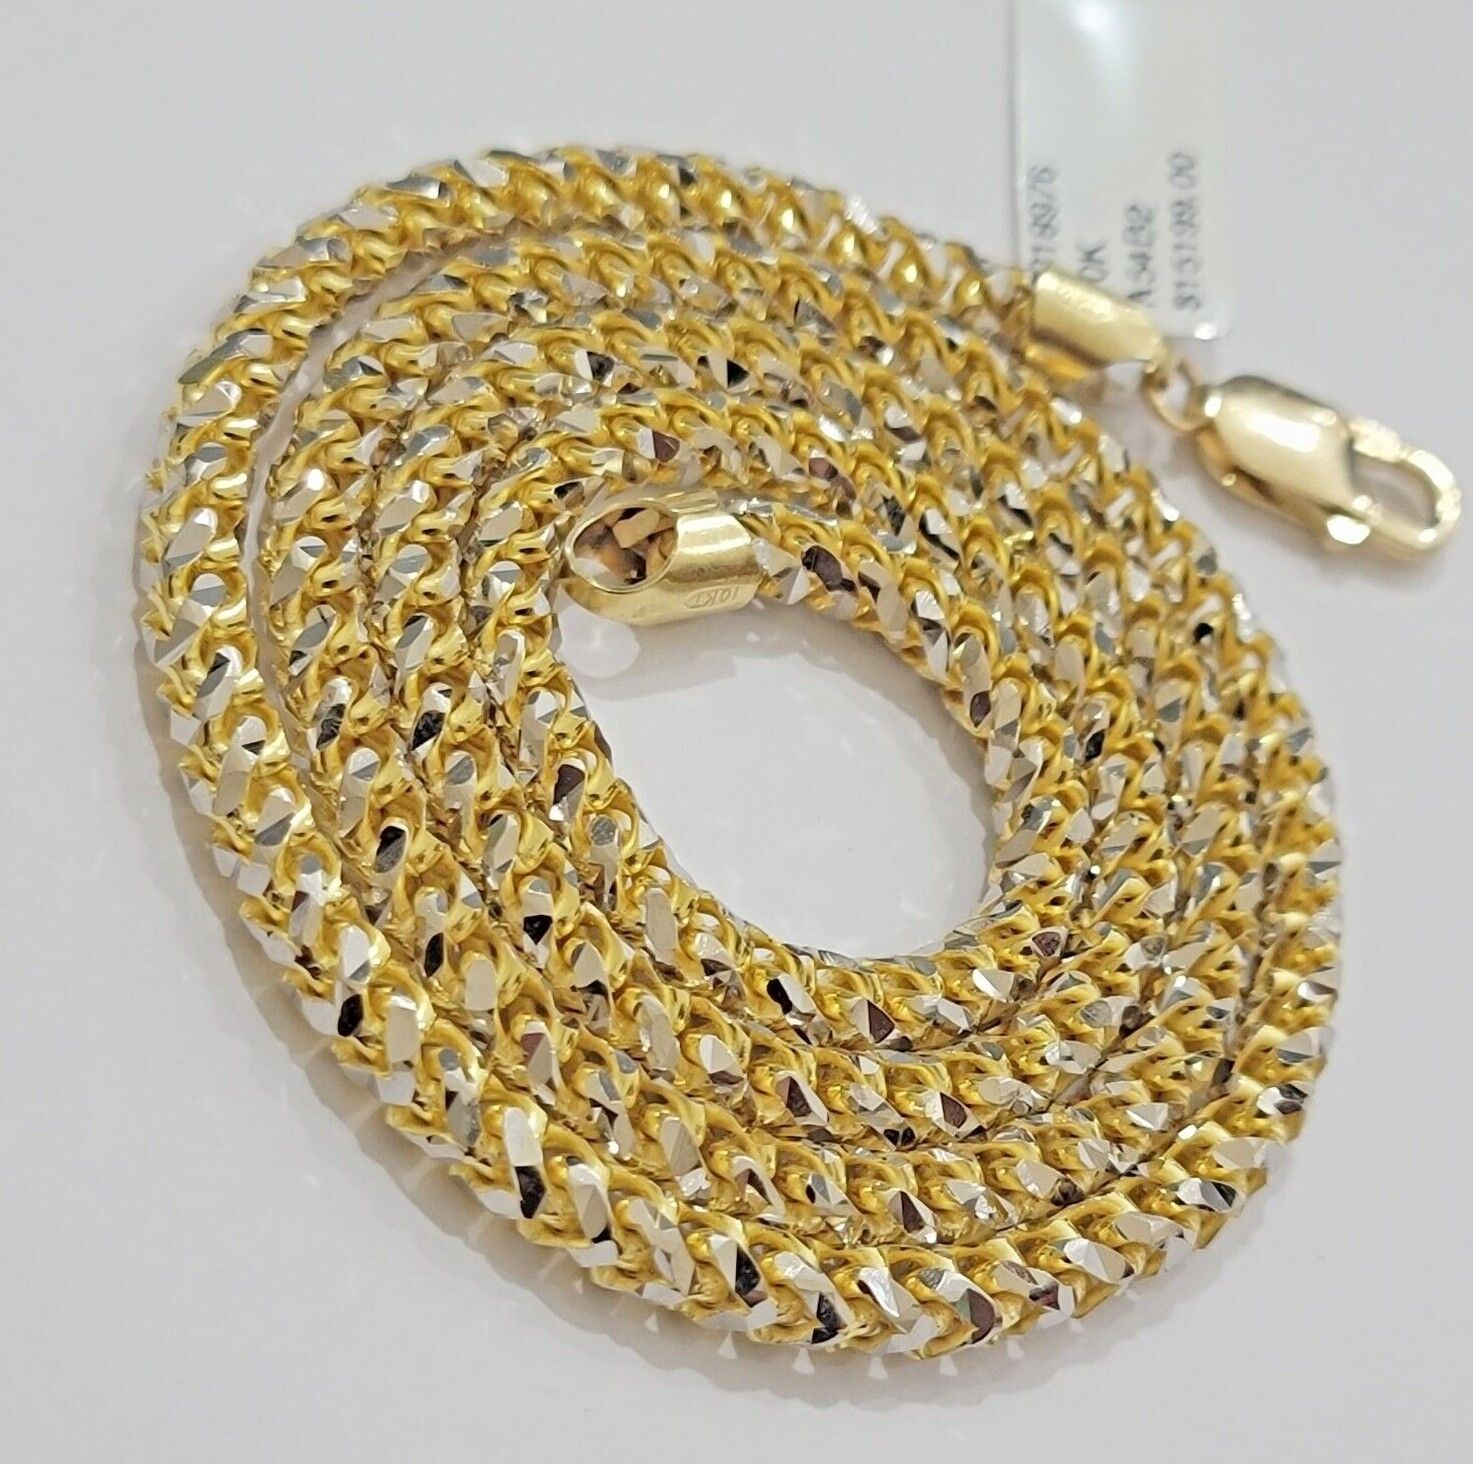 Real 10k Gold Solid Palm Chain Necklace Diamond cut 5mm 18" Choker , 10kt Mens